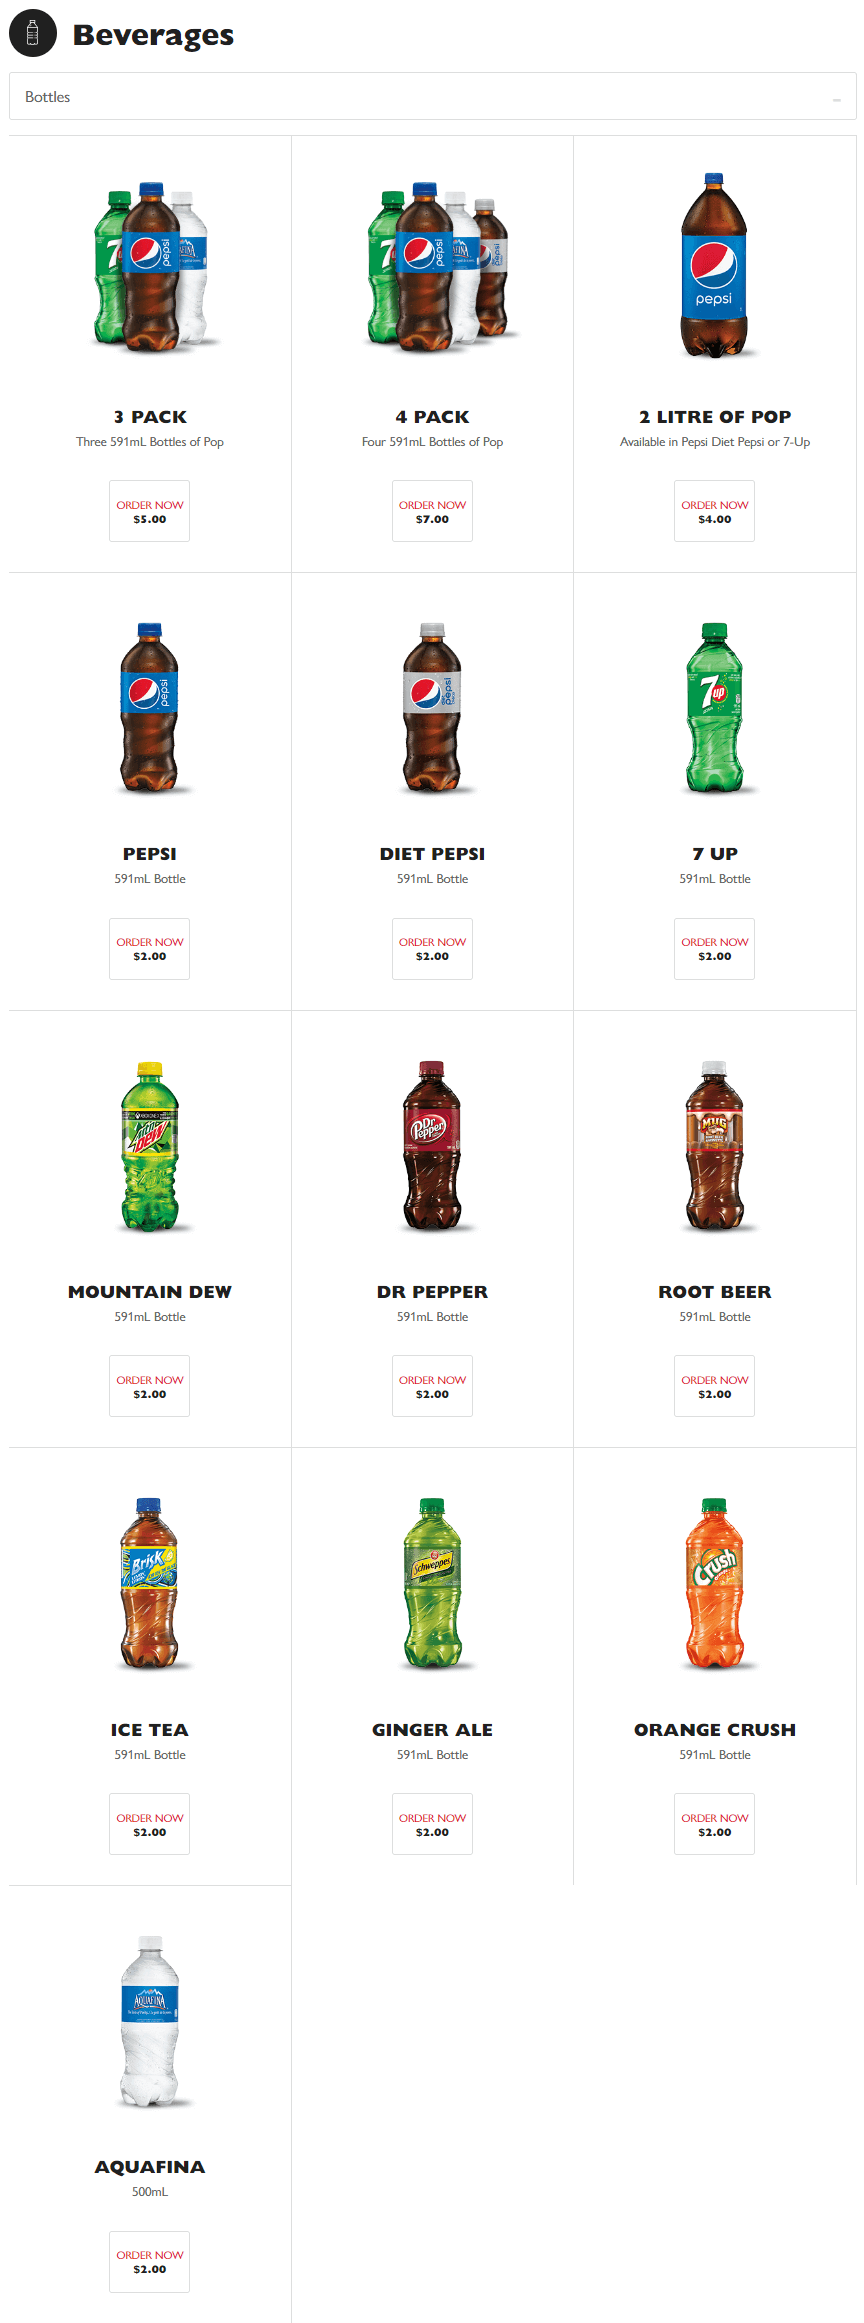 Gino’s Pizza Beverages Prices